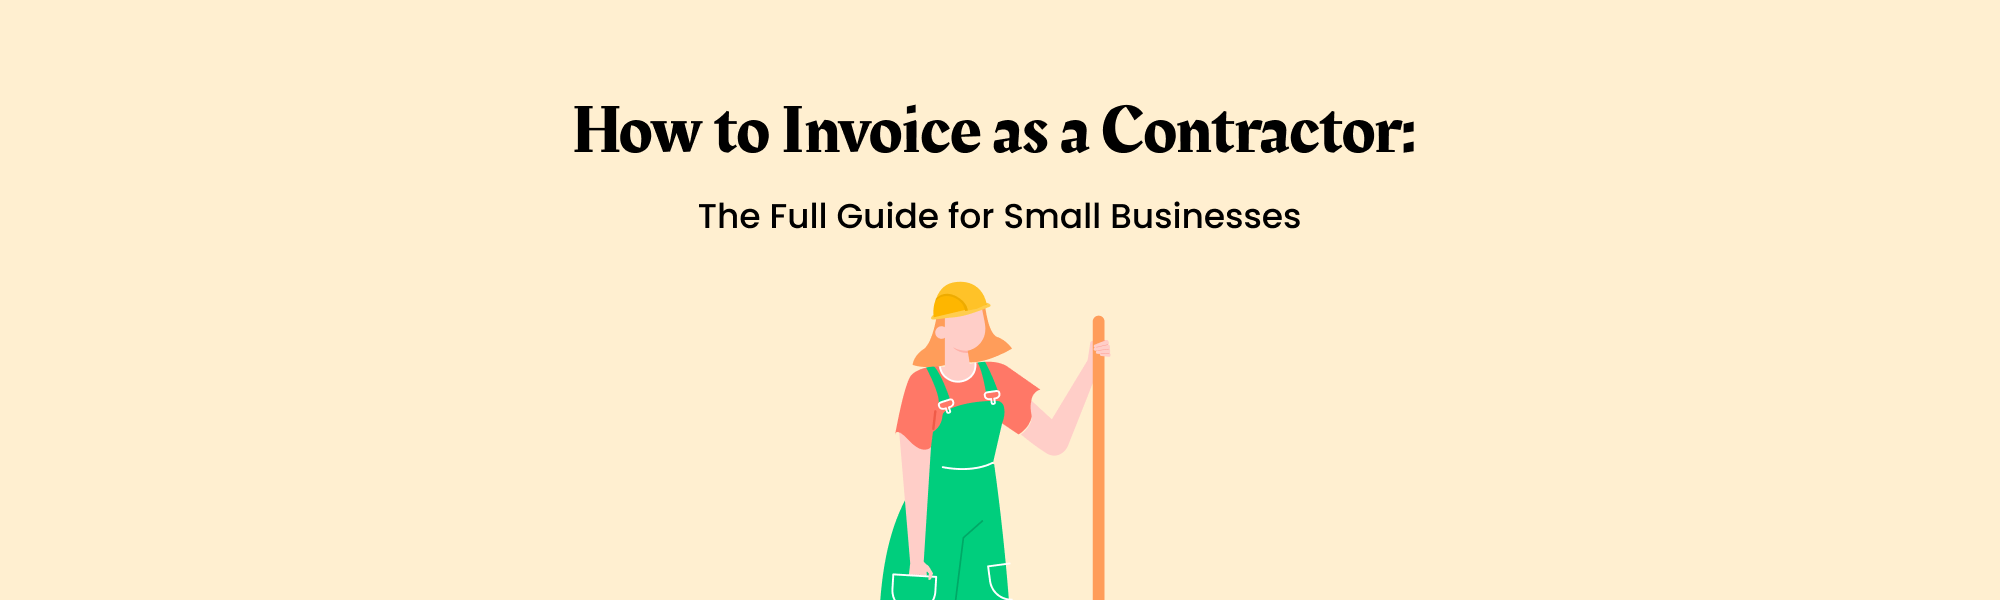 contractor-invoicing-guide